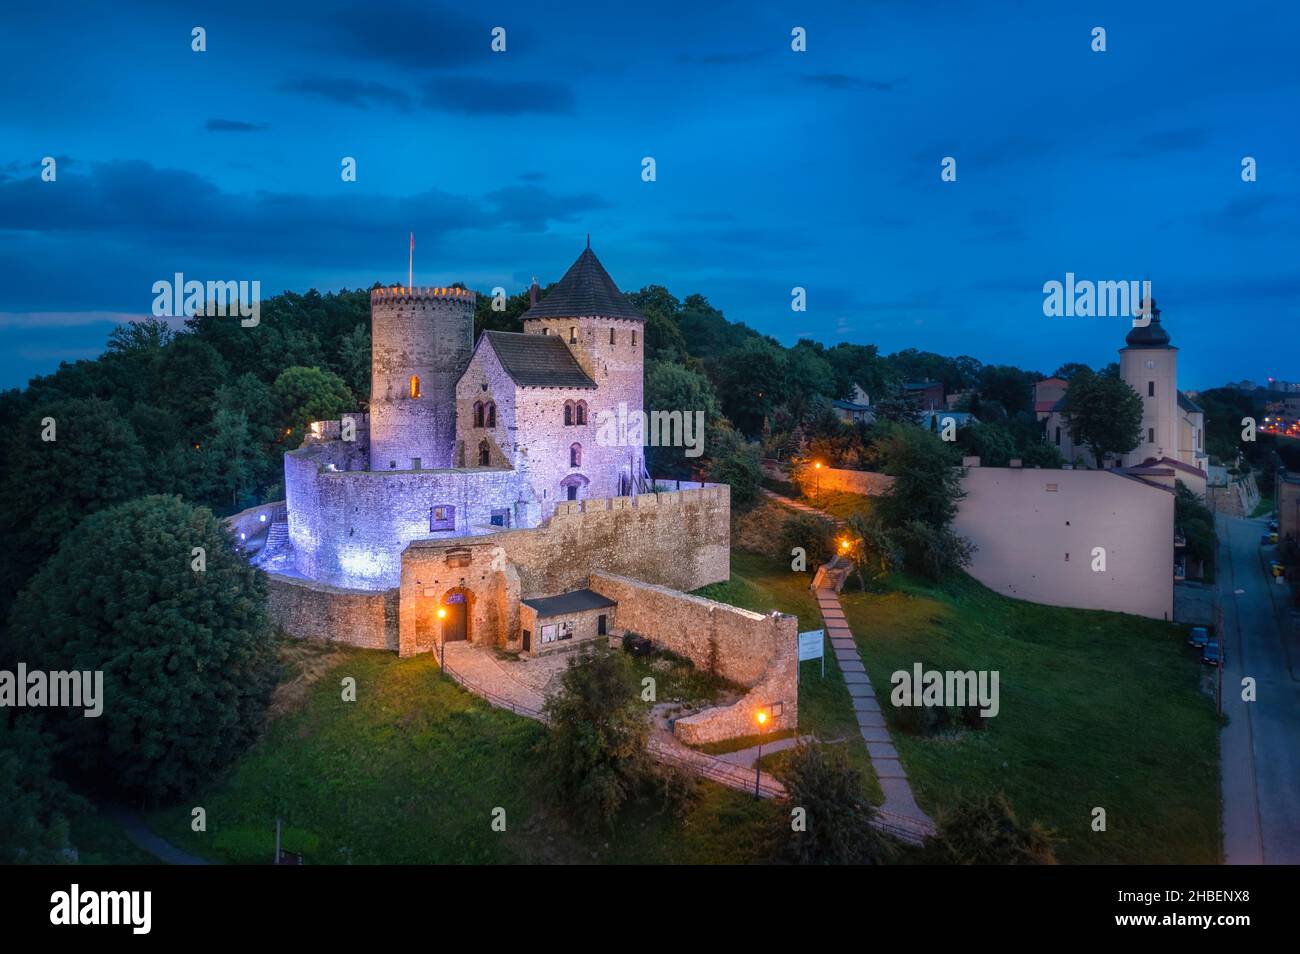 Aerial view of medieval castle at dusk in Bedzin, Poland Stock Photo